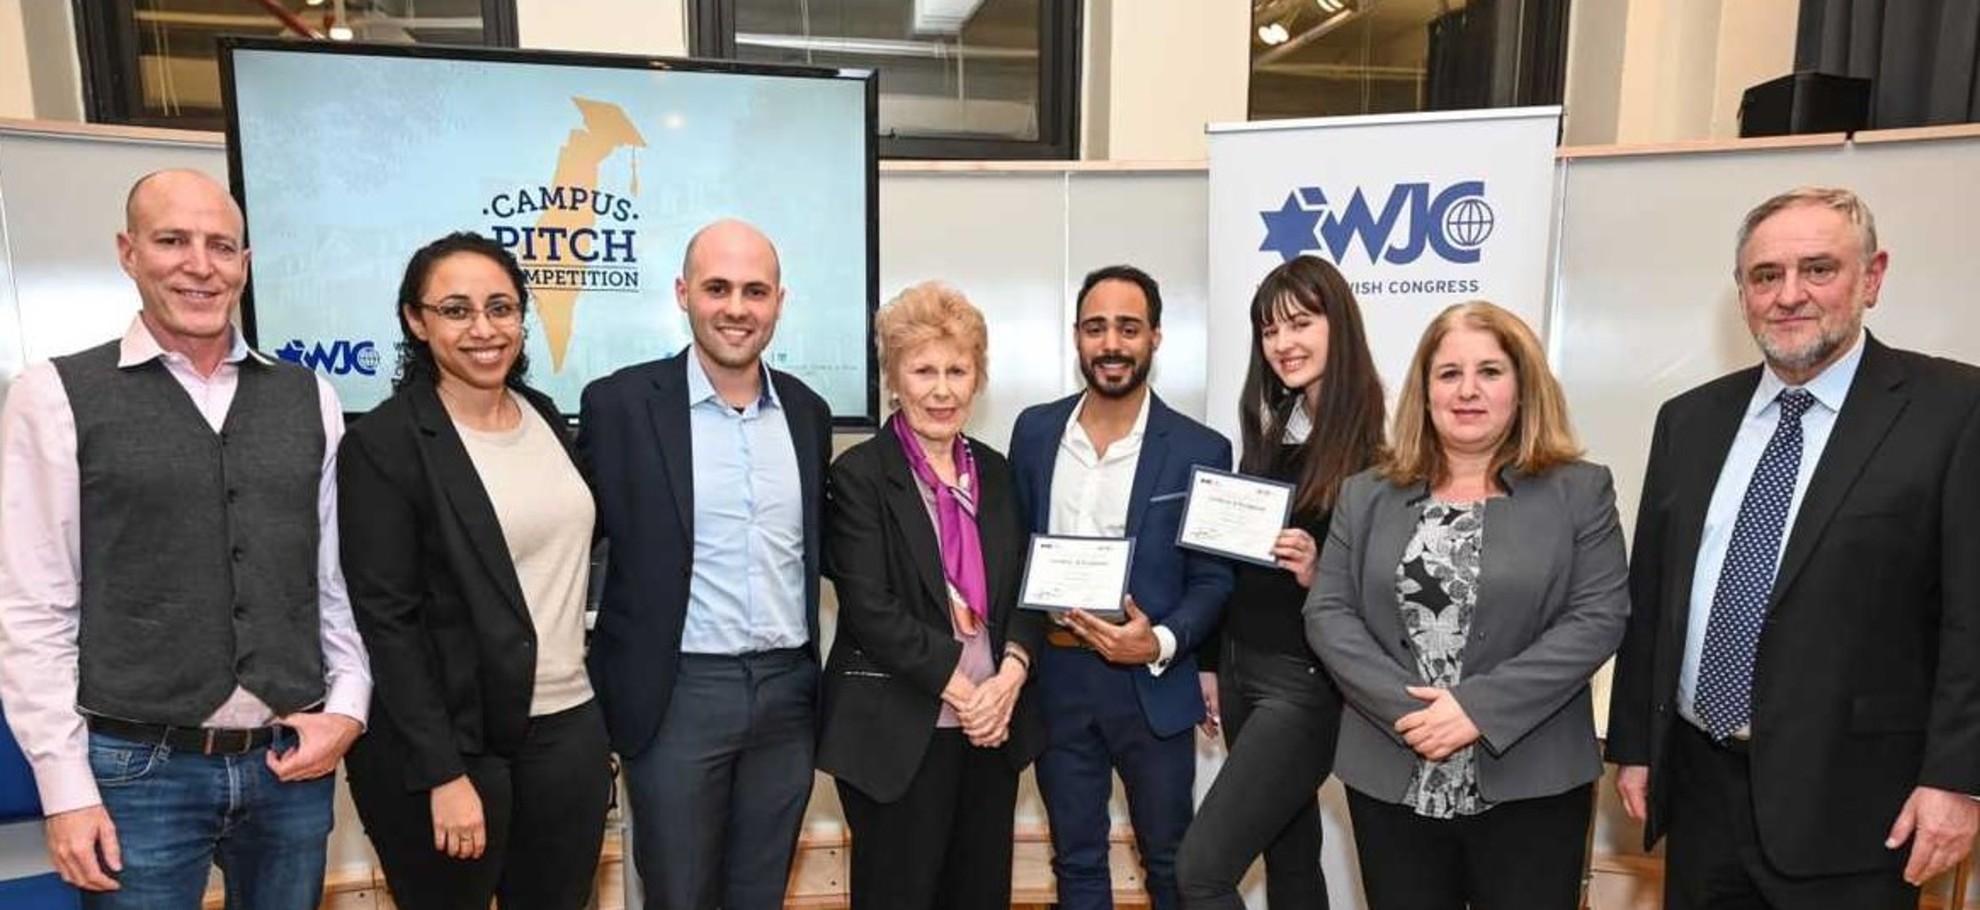 Campus Pitch winners to use $5,000 WJC grant to bring Israeli and US military vets together